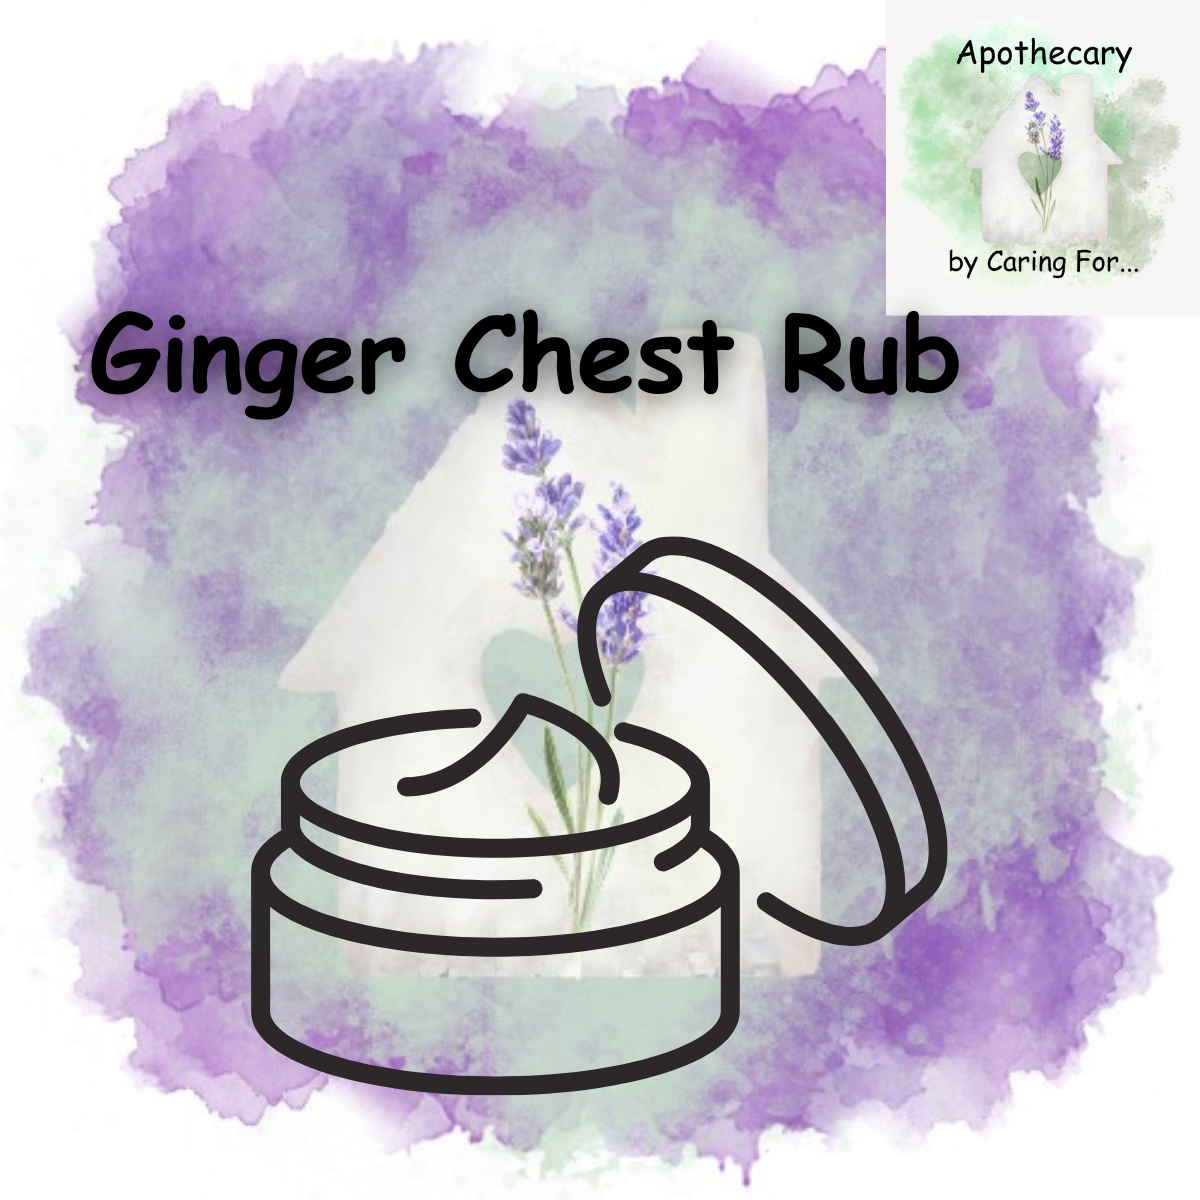 Ginger Chest Rub | Salve | Apothecary by Caring For...